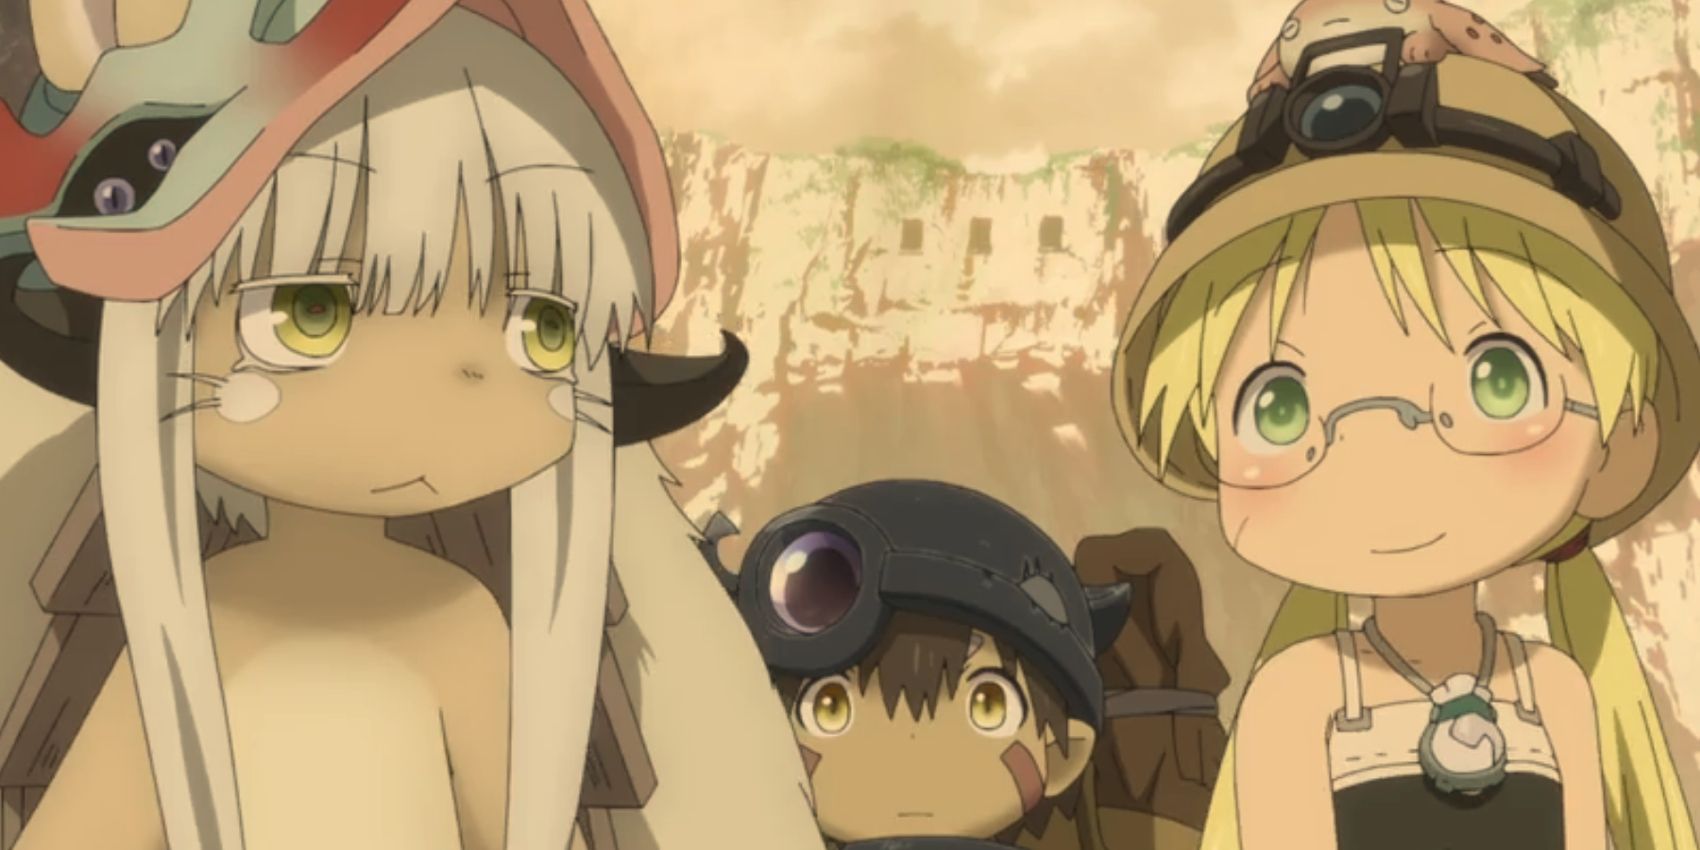 Made in Abyss: The Golden City of the Scorching Sun Episode 2